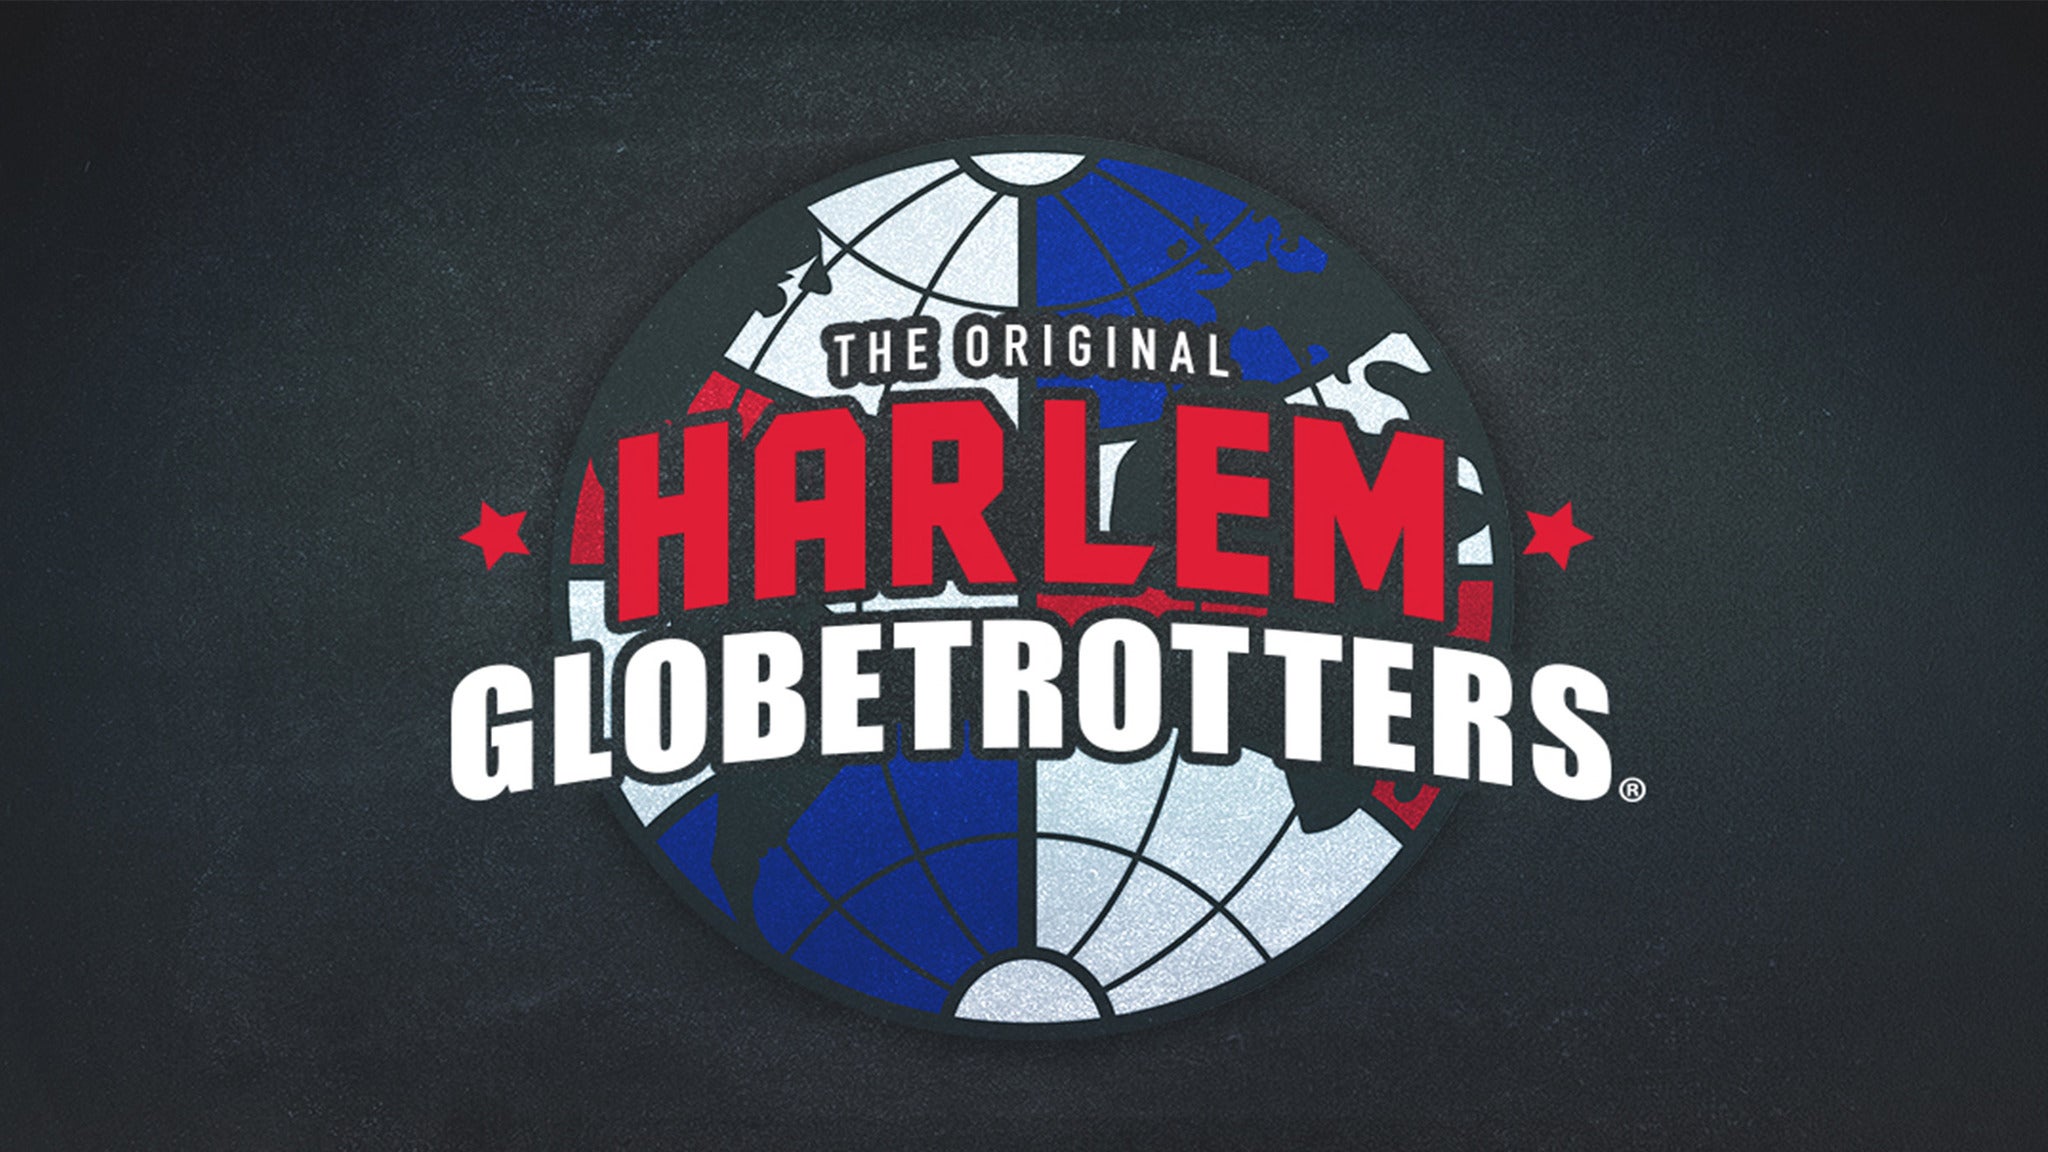 Harlem Globetrotters pre-sale password for approved tickets in Charlottesville